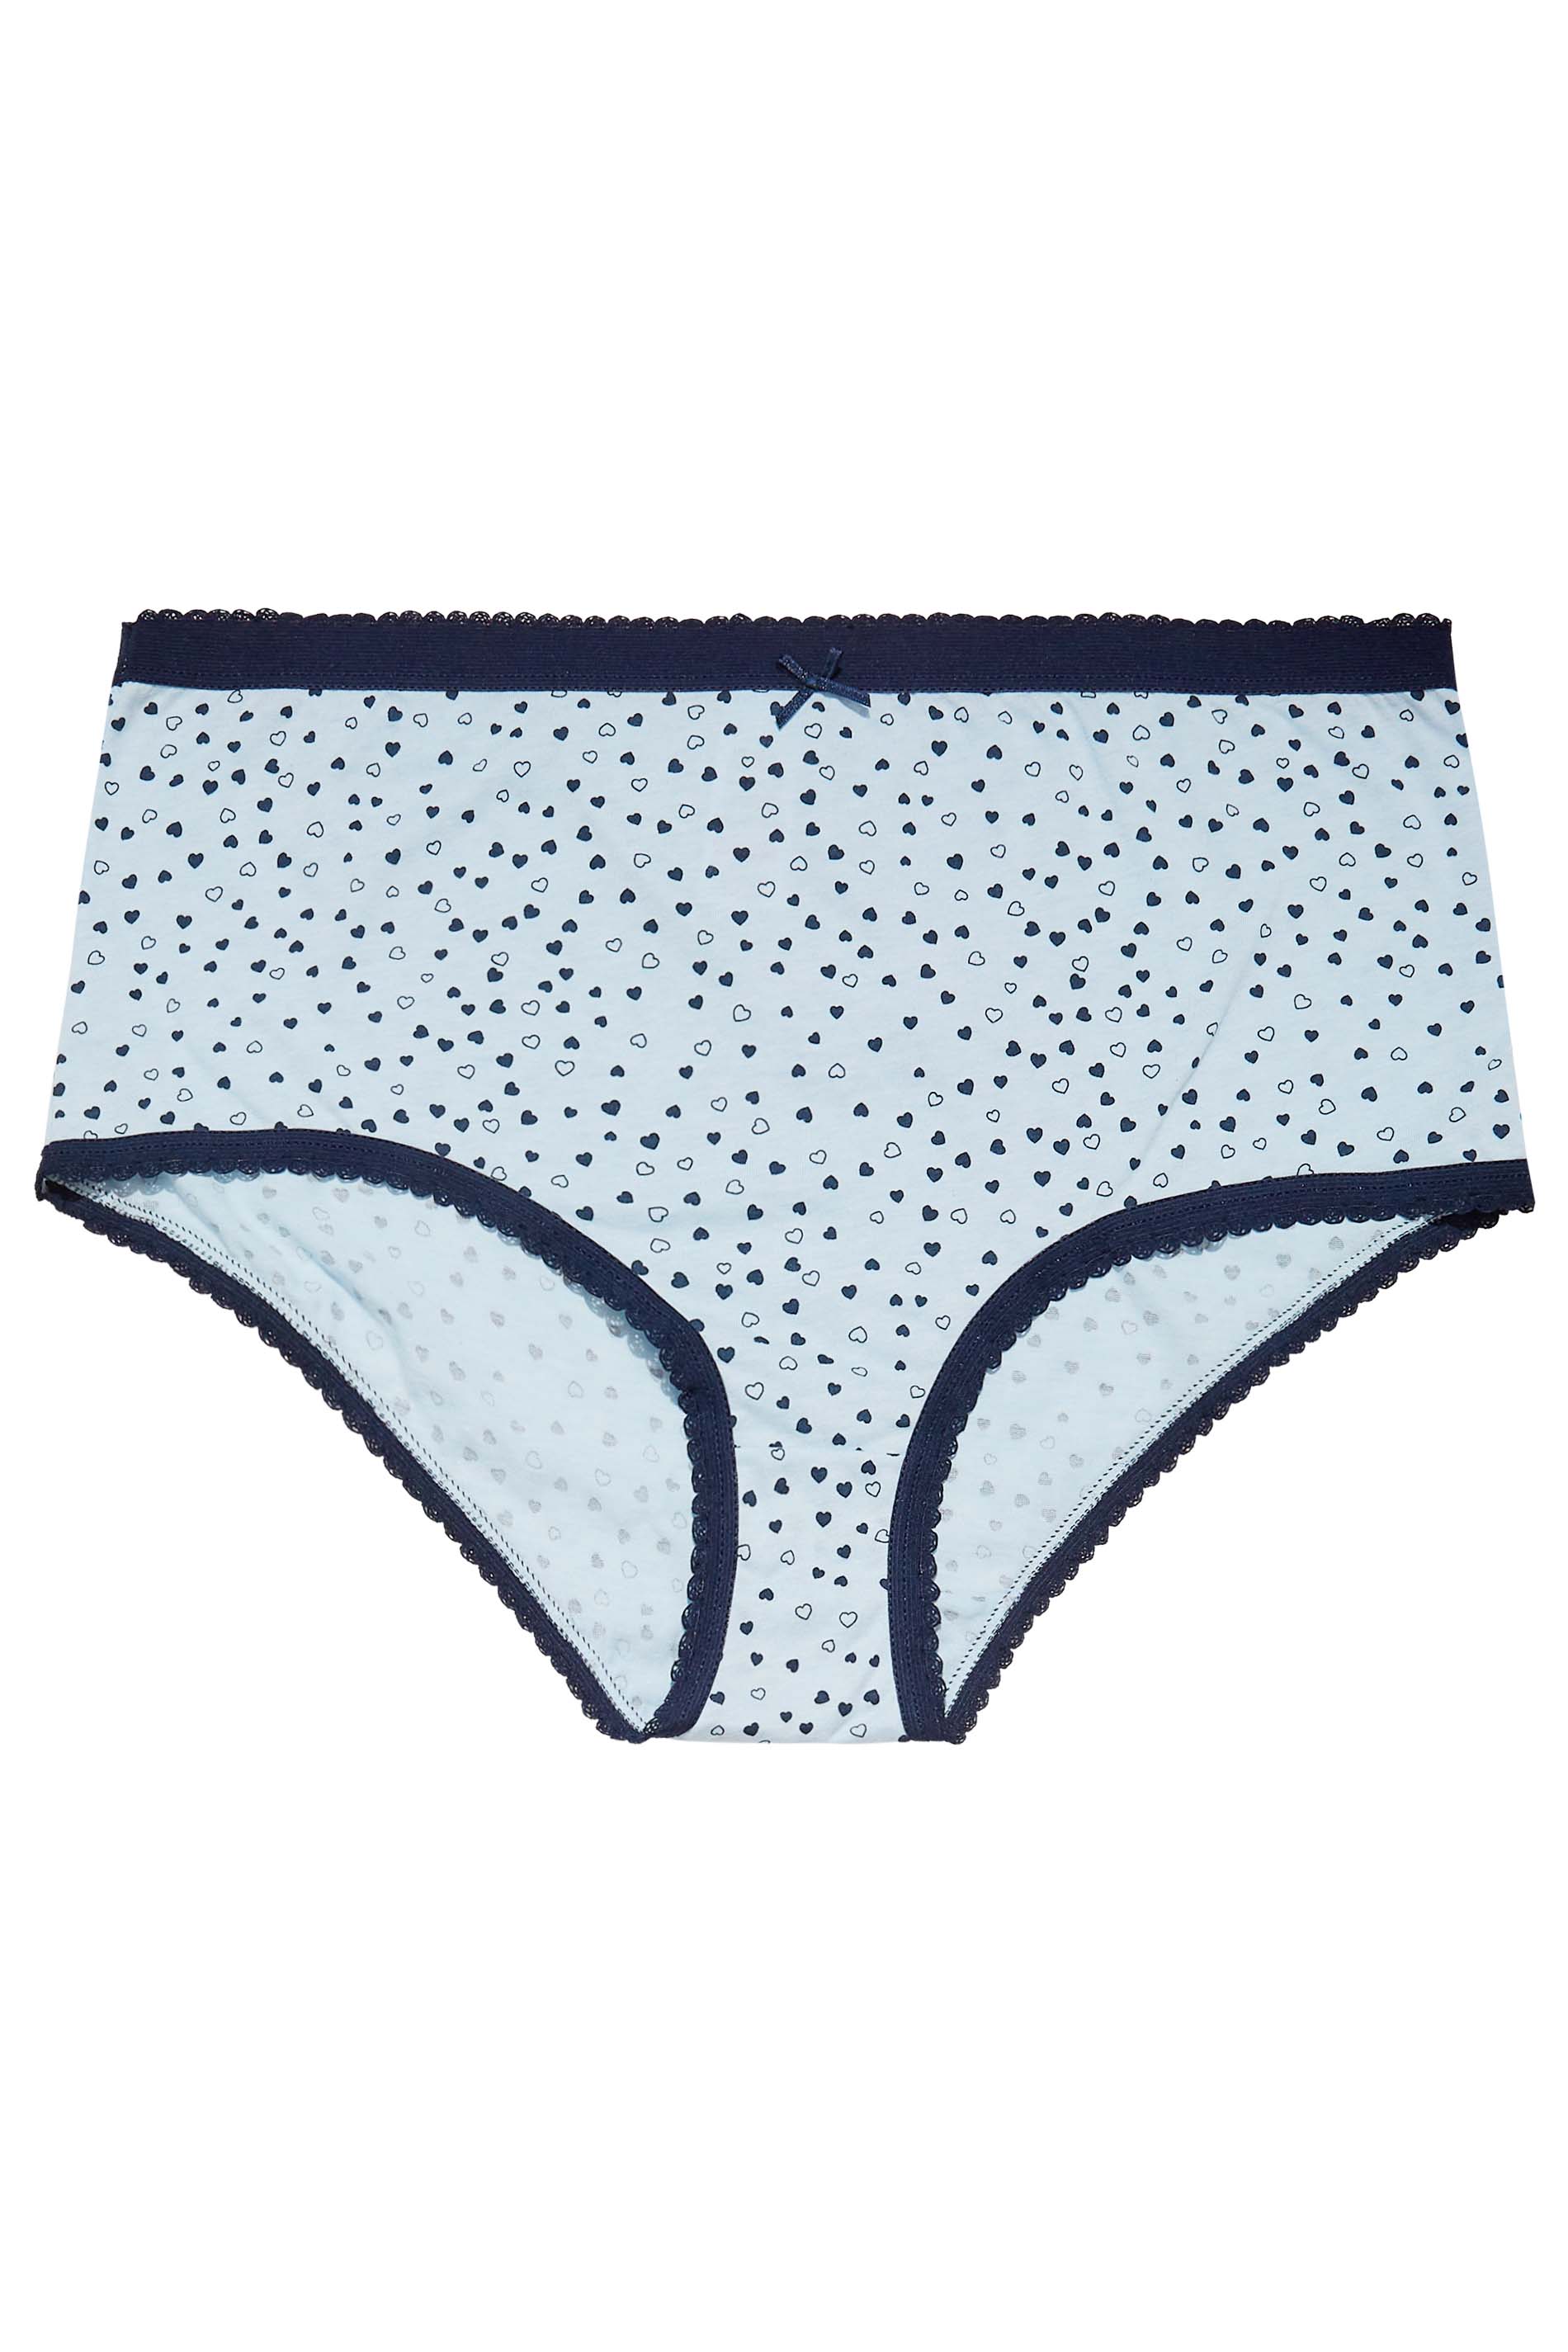 5 PACK Curve Blue Heart Print High Waisted Full Briefs | Yours Clothing 3